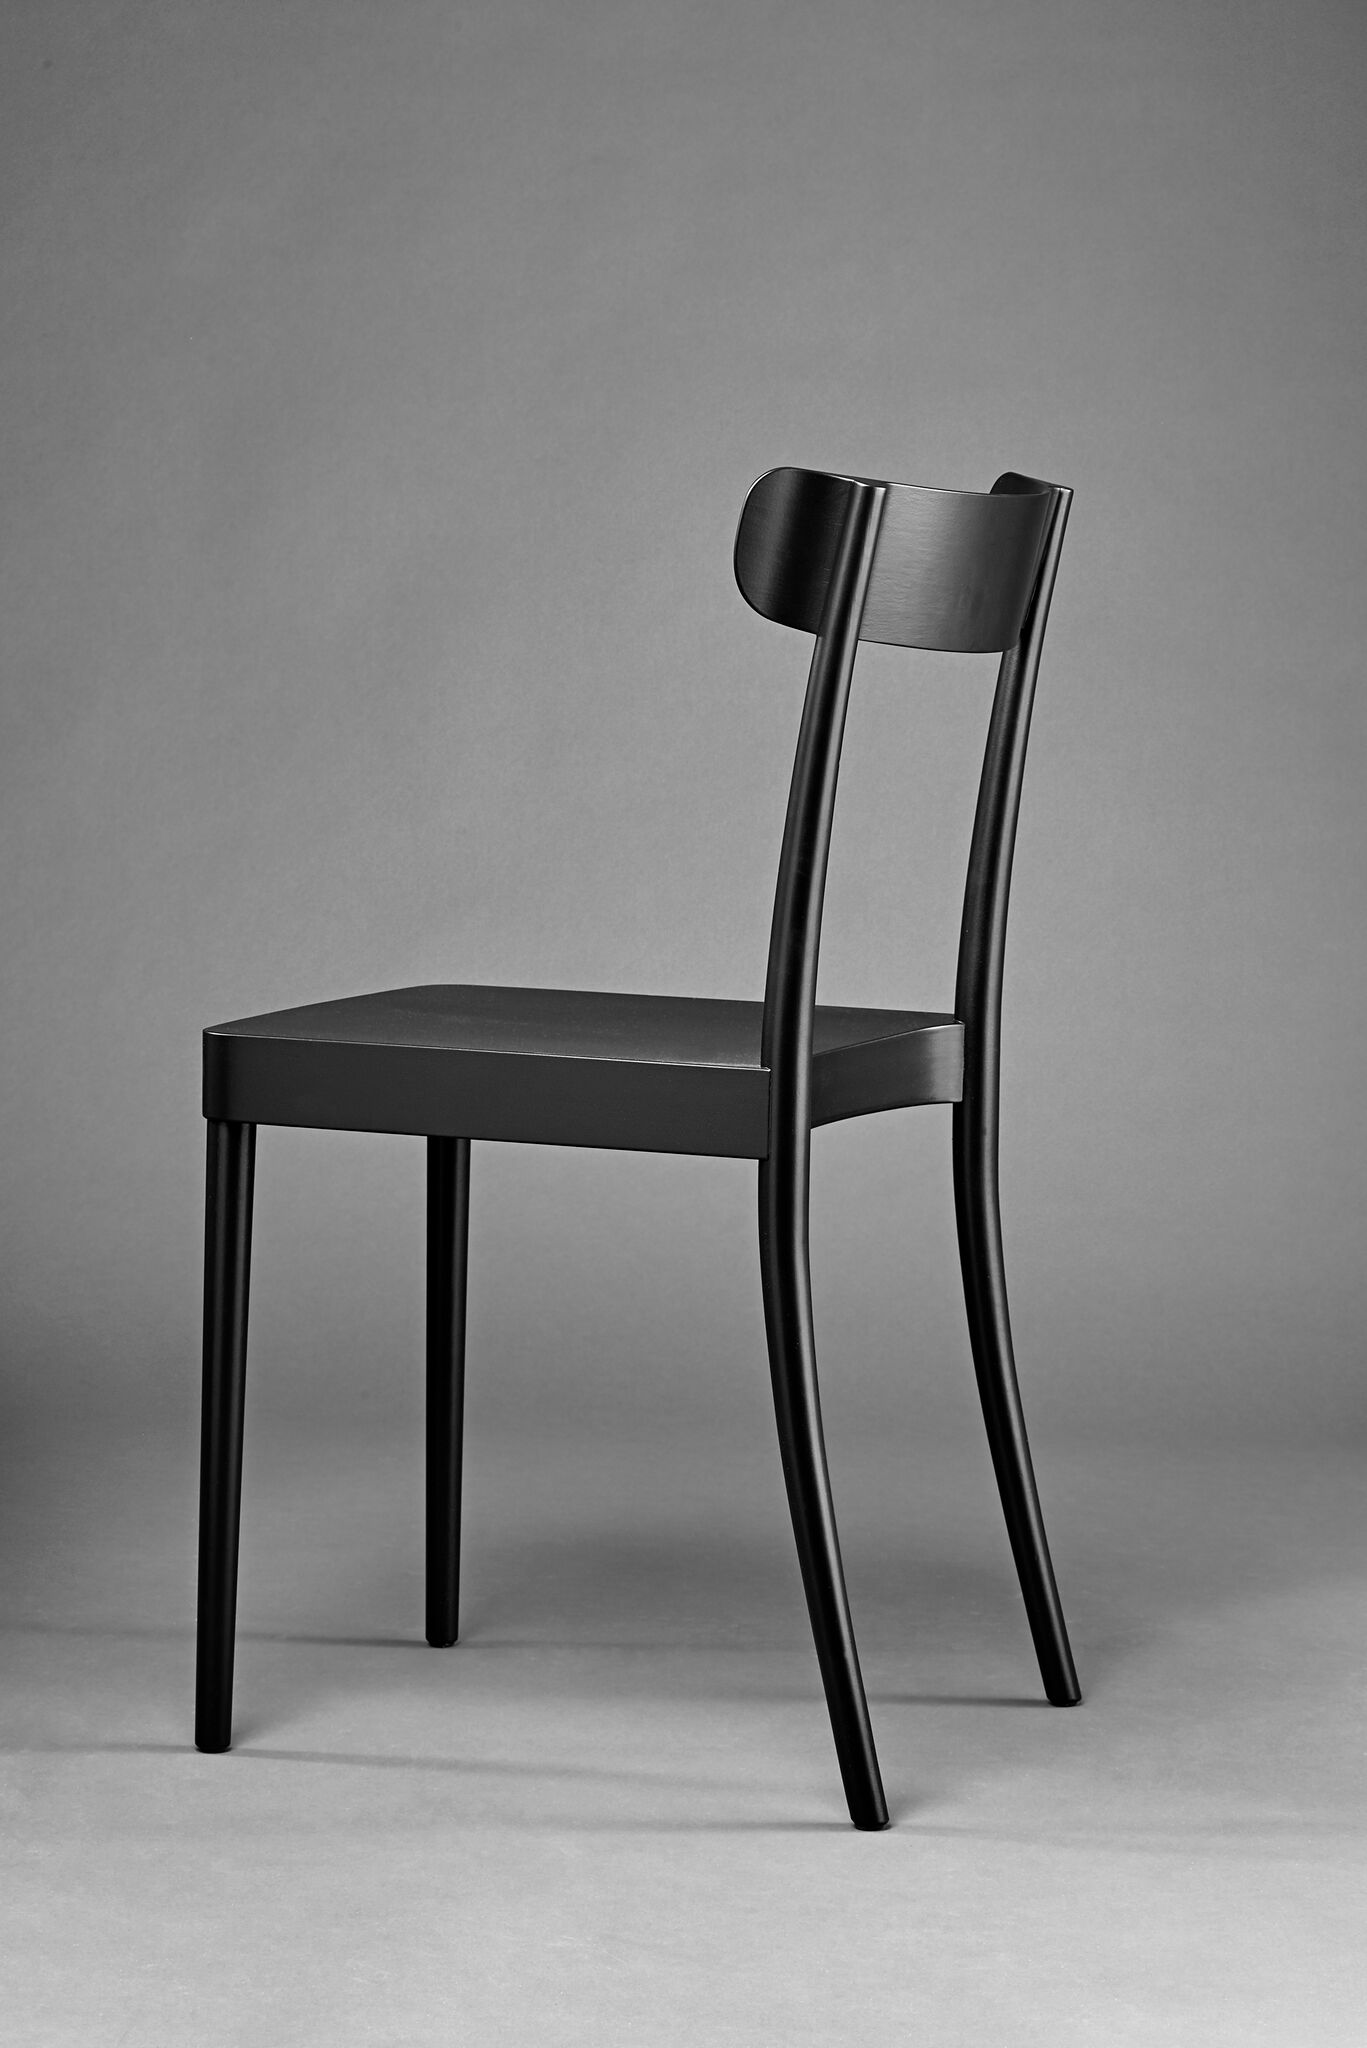 Petite Chair by David Ericsson for Gärsnäs